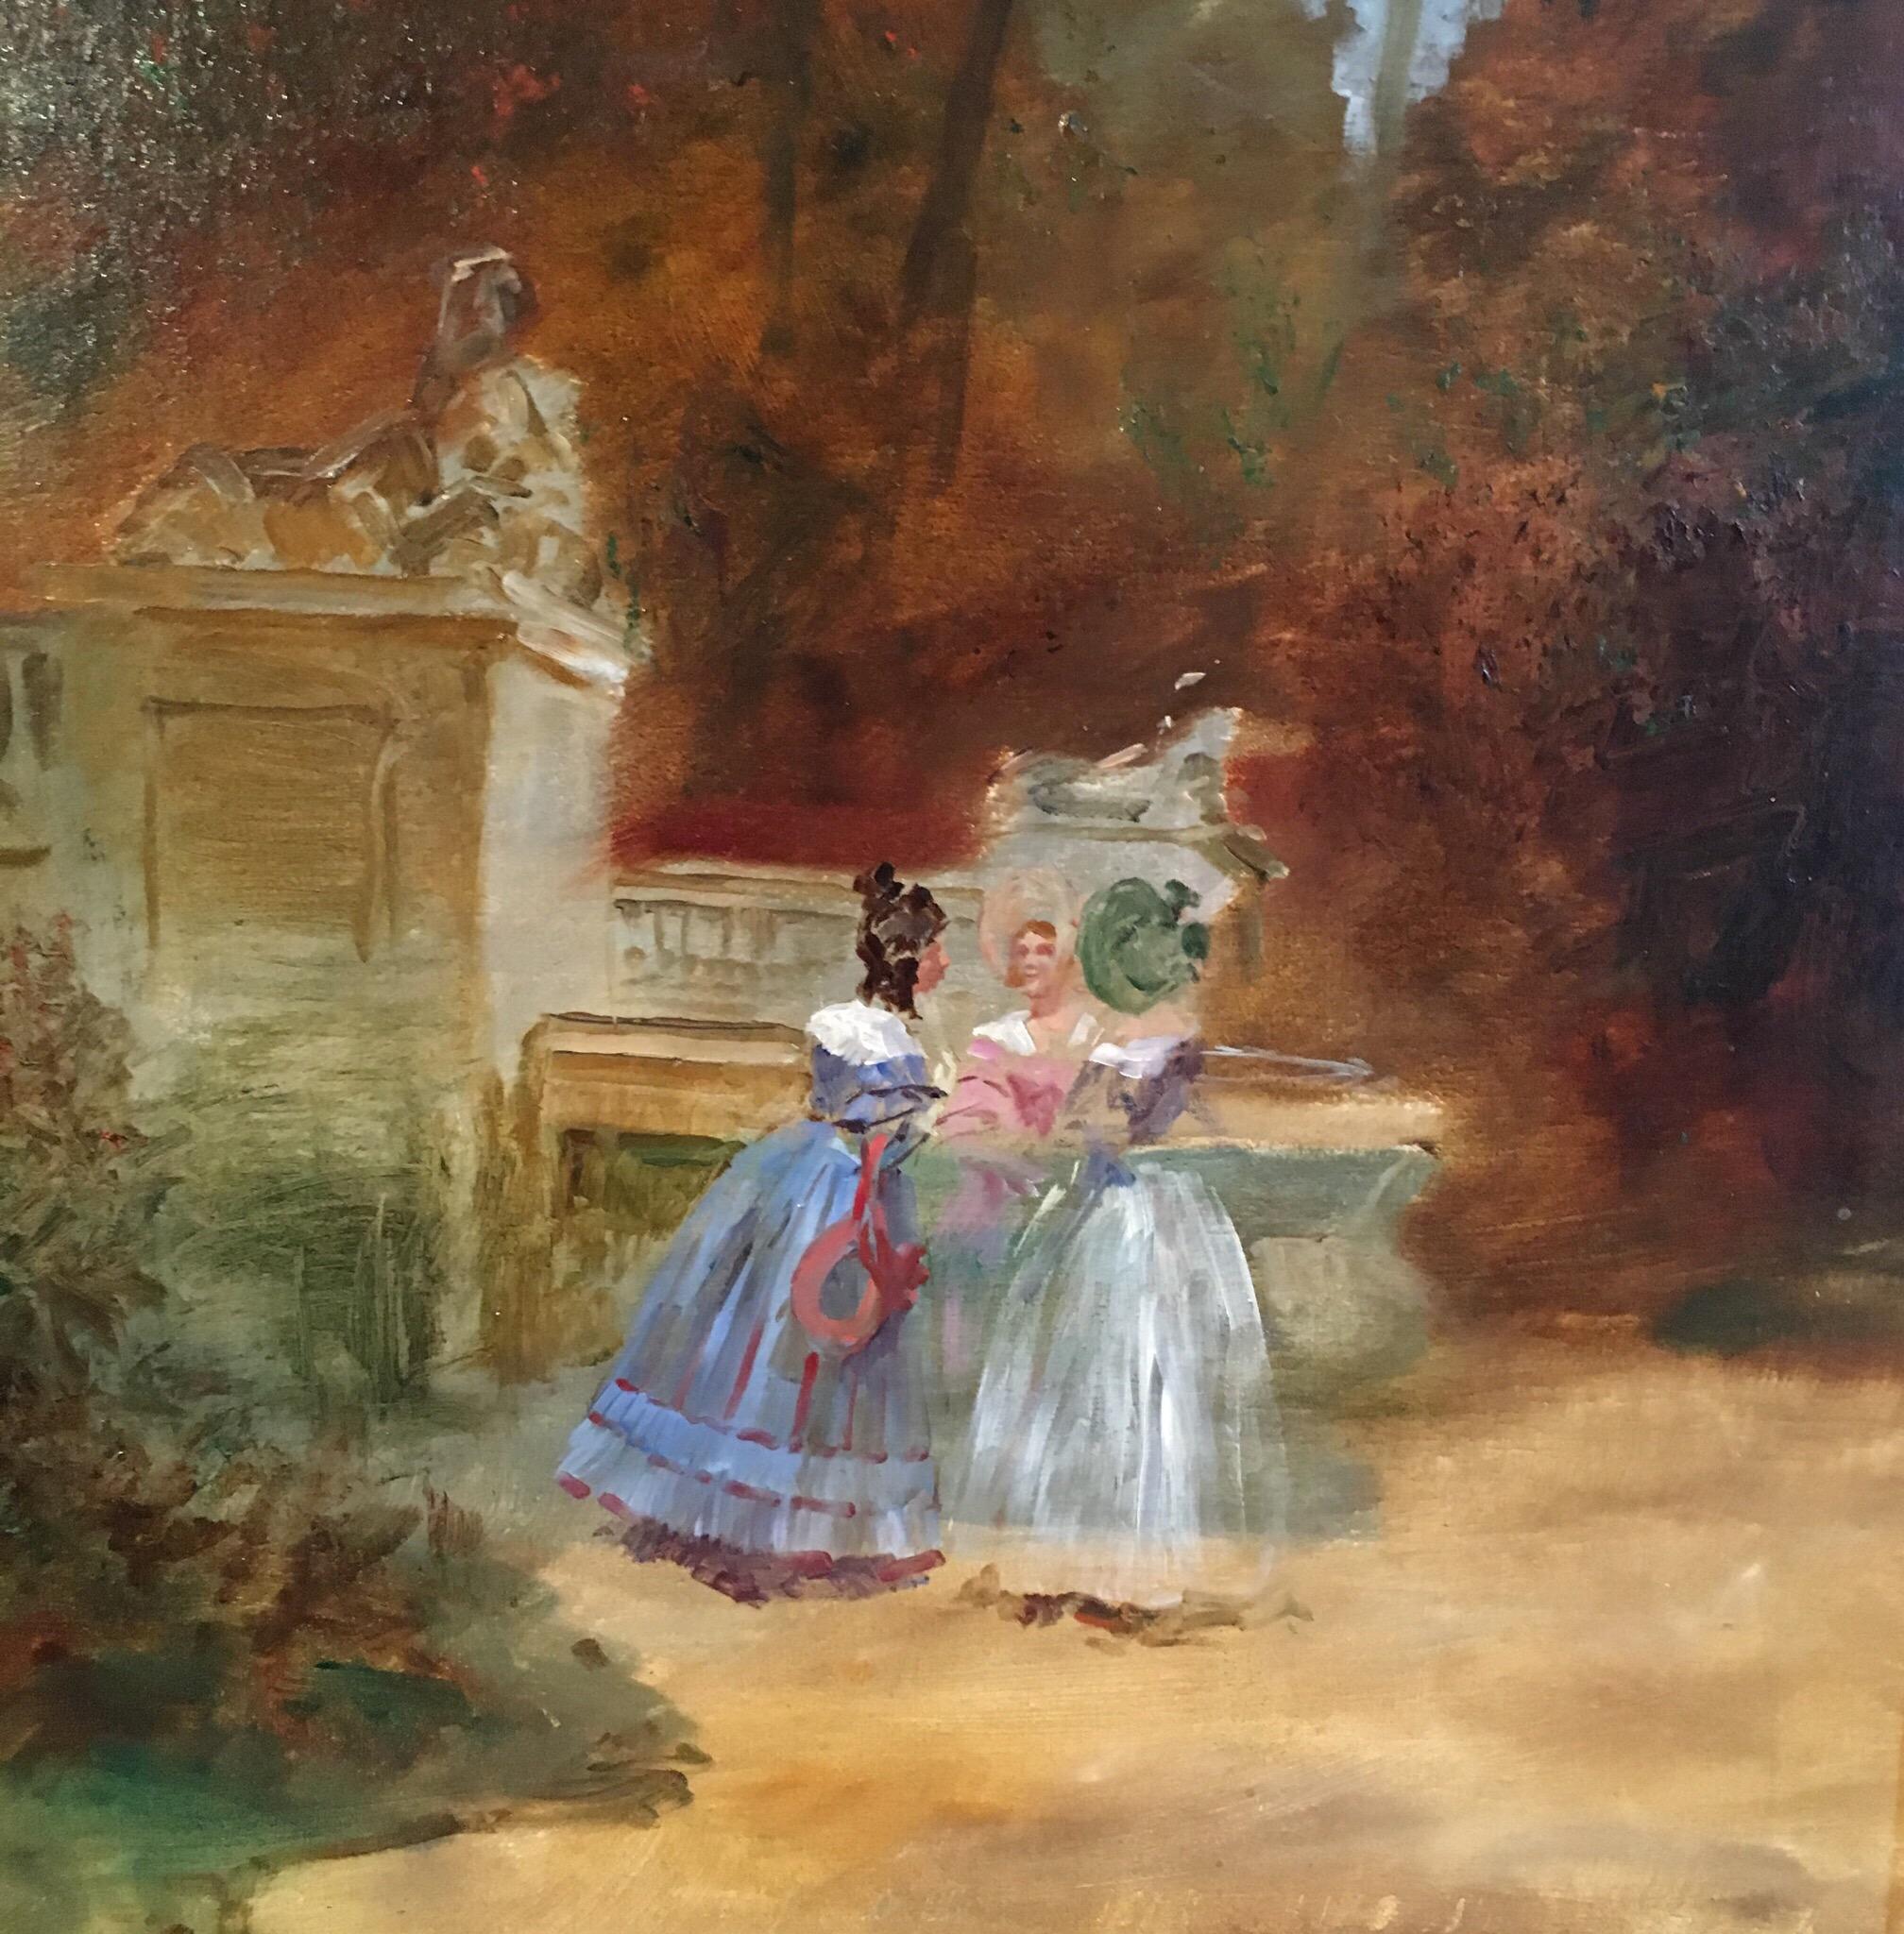 'In the Park' Impressionist Landscape, Fine Antique Oil Painting, Signed - Brown Figurative Painting by Theodore Roussel